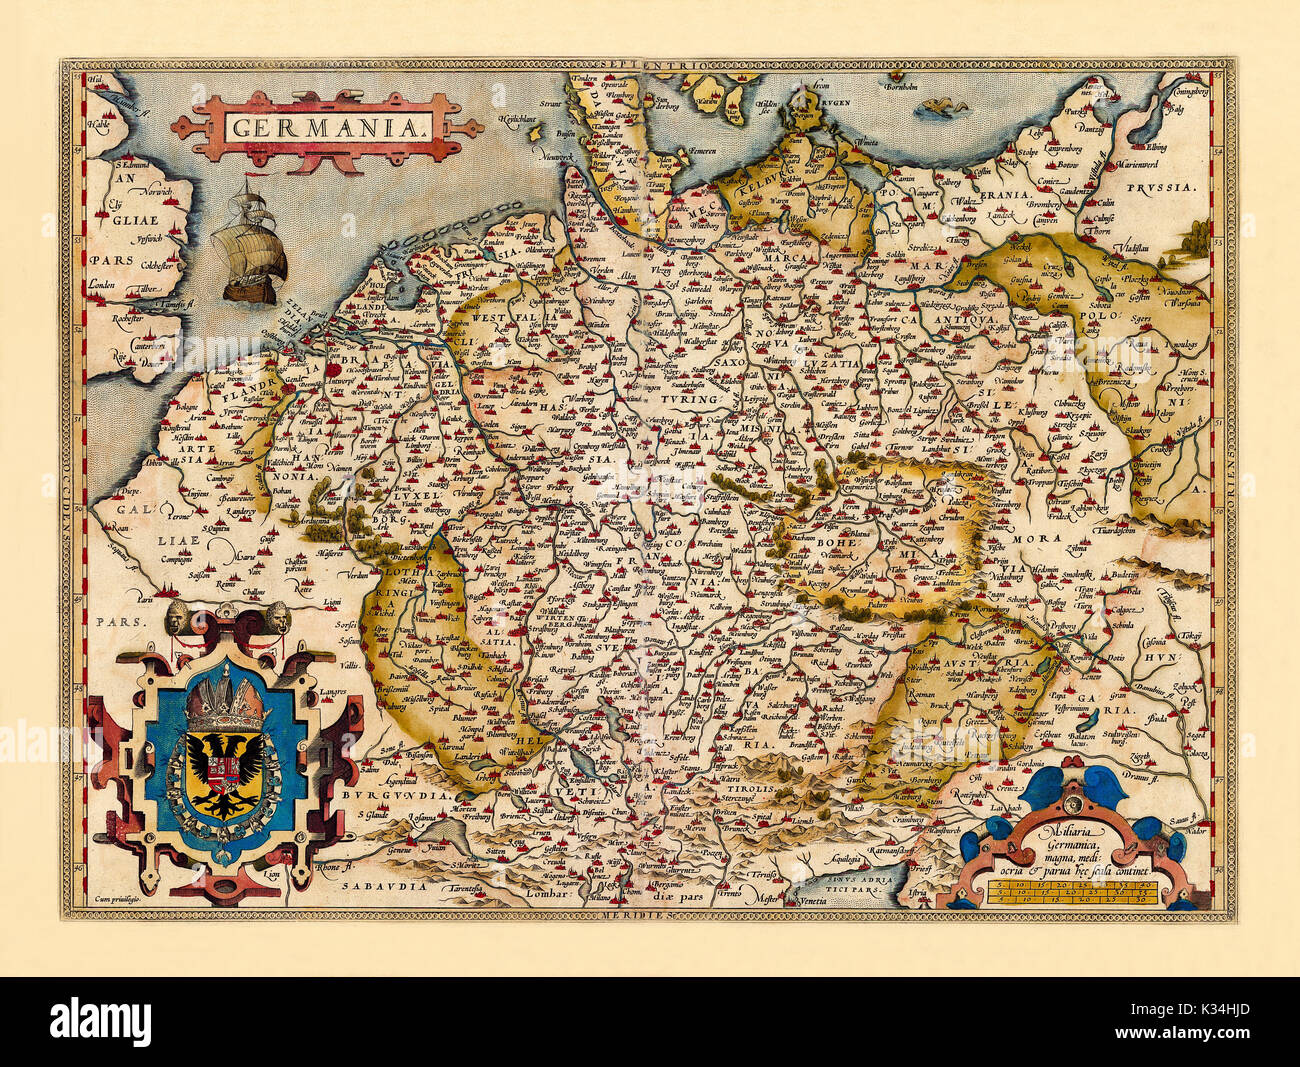 Old map of Germany in excellent state of preservation. By Ortelius, Theatrum Orbis Terrarum, Antwerp, 1570 Stock Photo